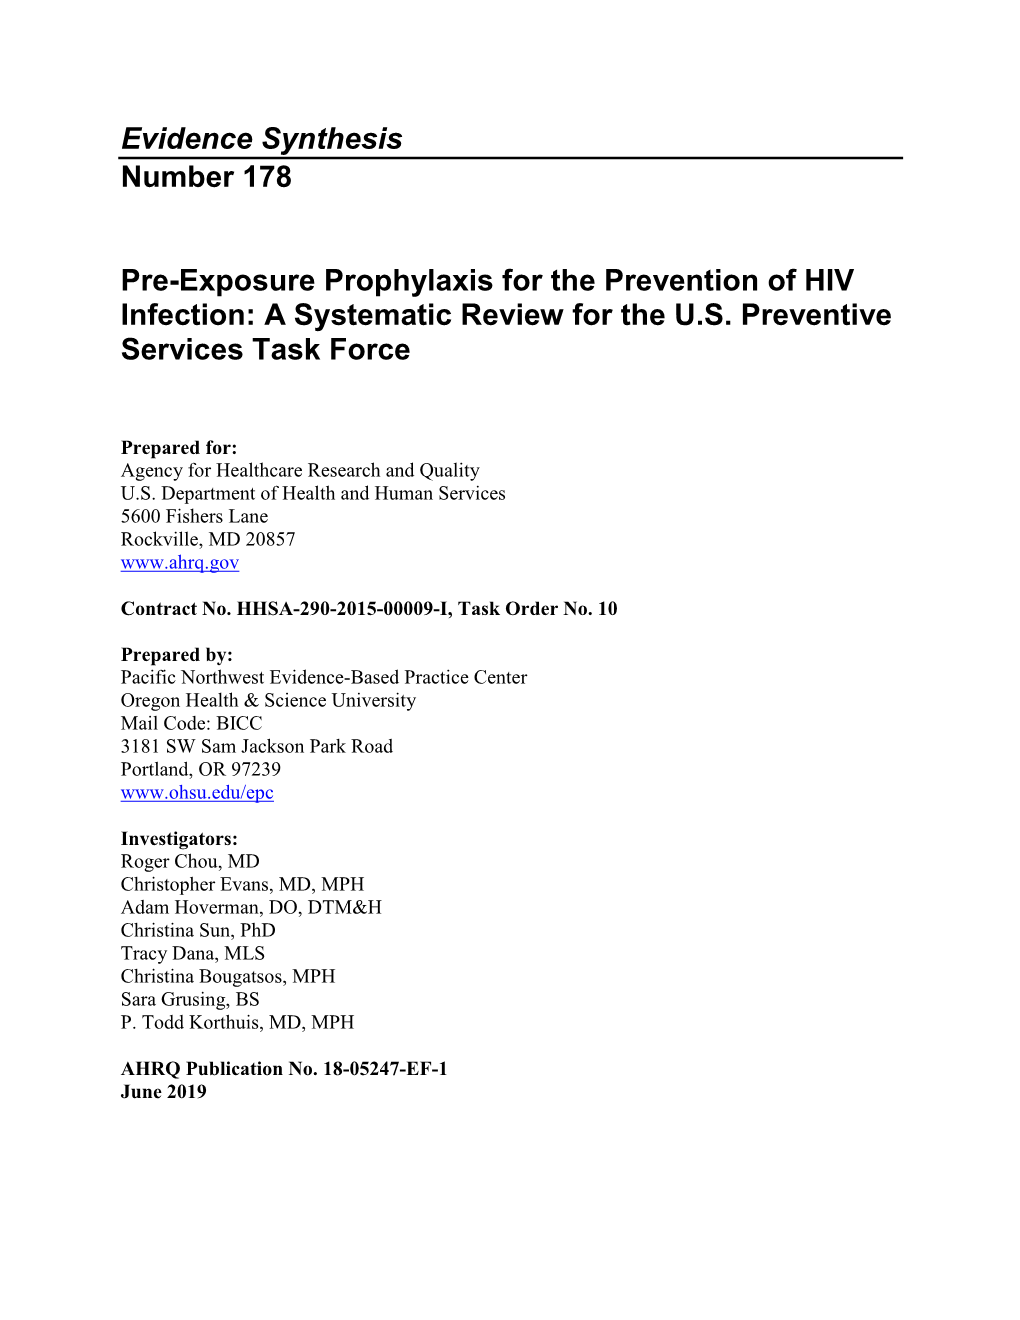 Pre-Exposure Prophylaxis for the Prevention of HIV Infection: a Systematic Review for the U.S